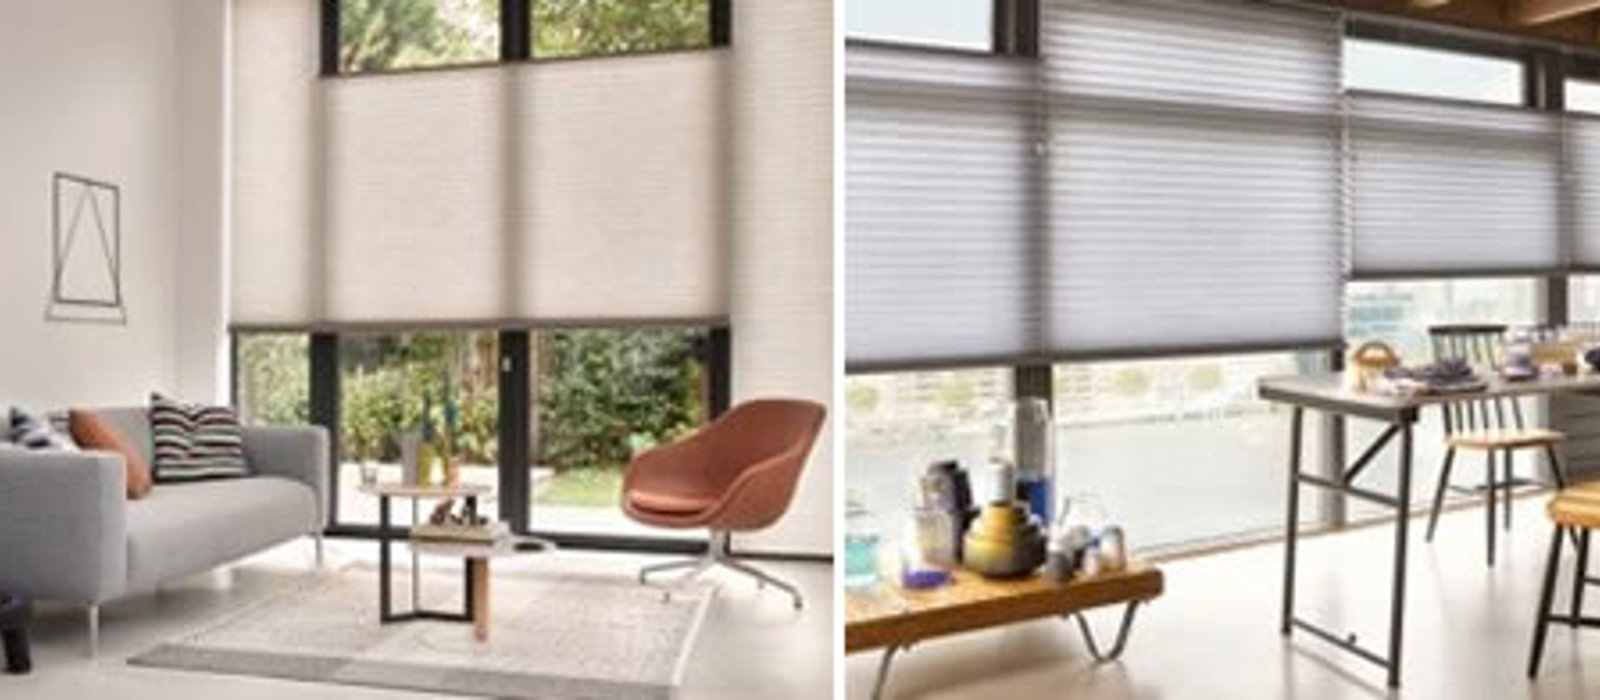 Duette smart blinds in a living room and and kitchen diner to keep sun out of the home